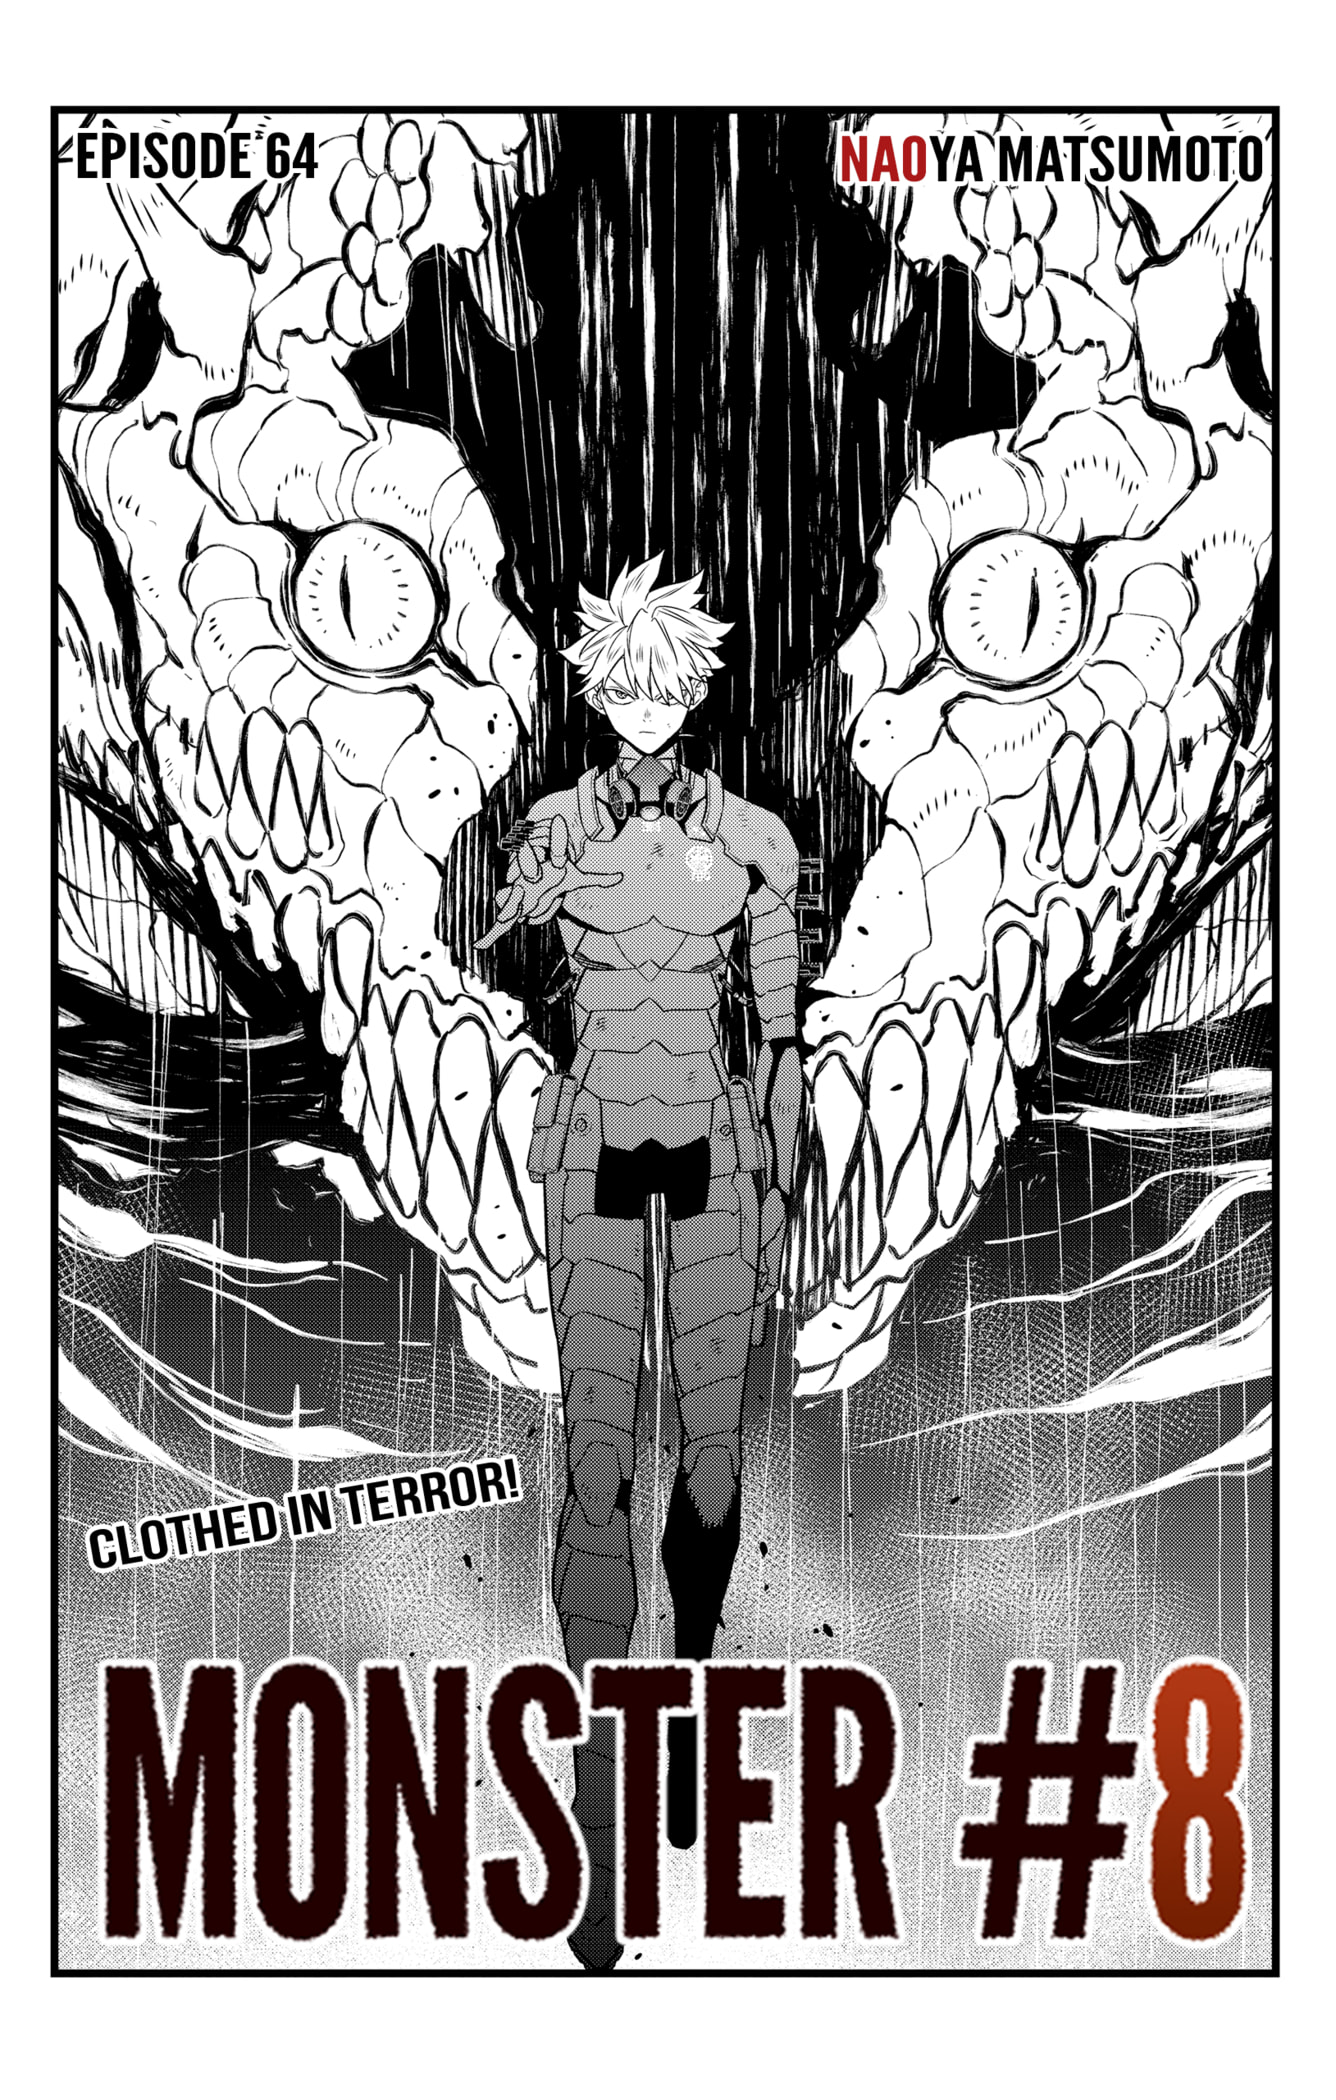 Kaiju No. 8 Chapter 64, monster #8 chapter 64